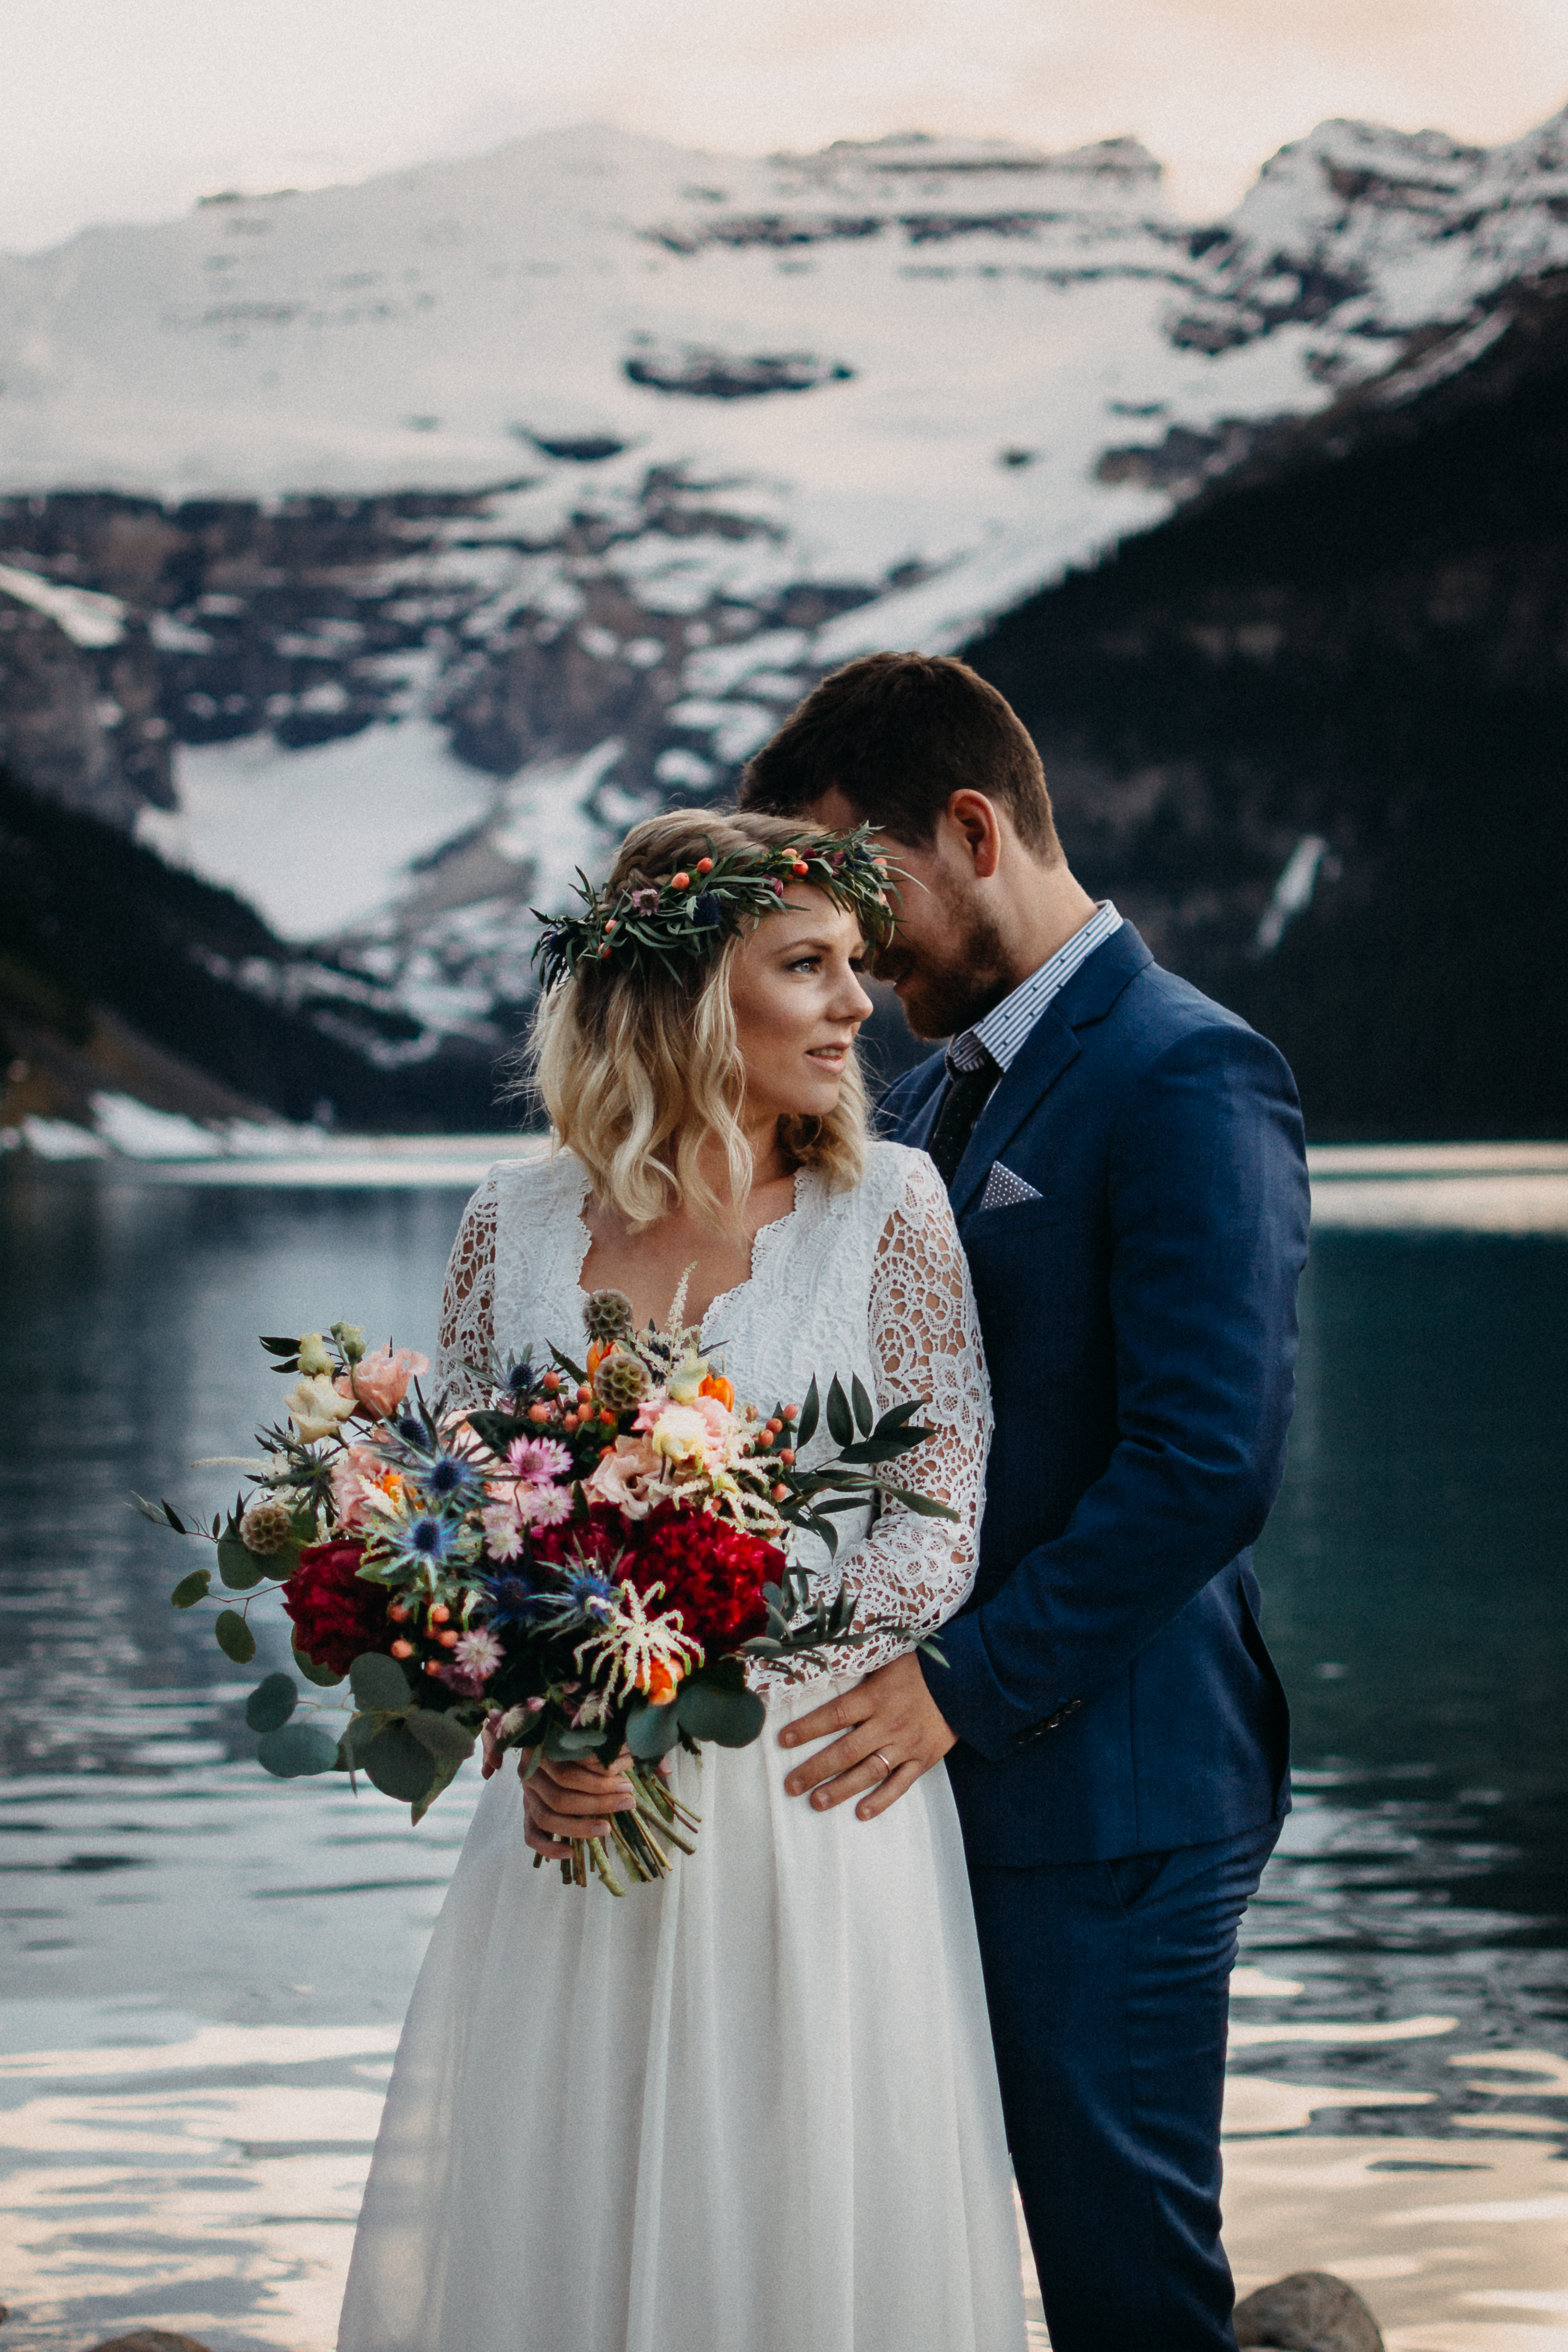 The bride and groom holding each other at Lake Louise, Alberta